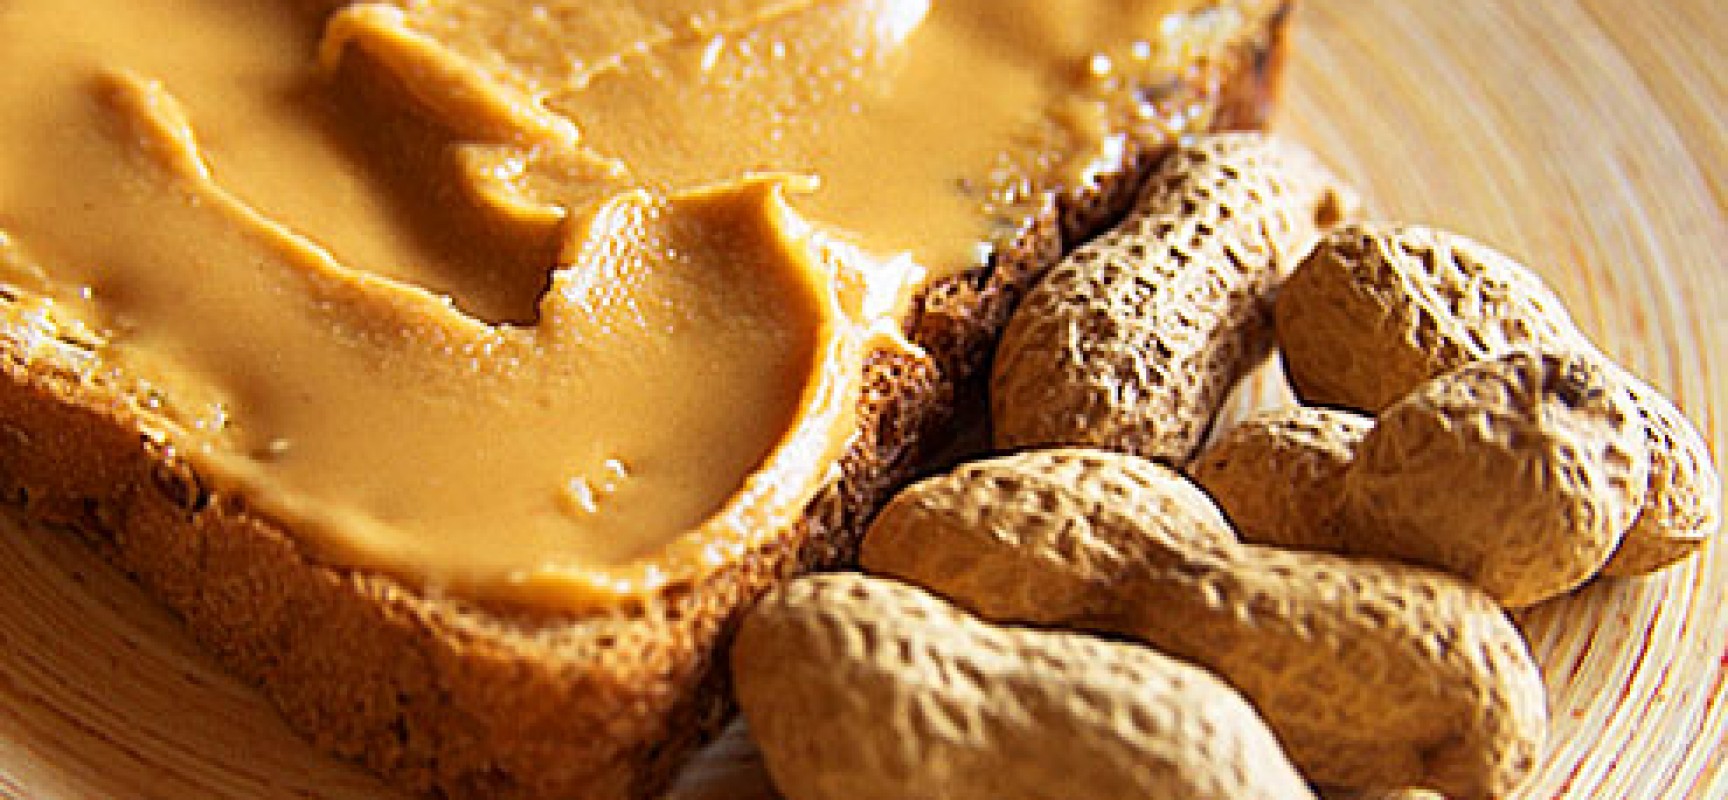 That Nutty, Creamy Peanut Butter!